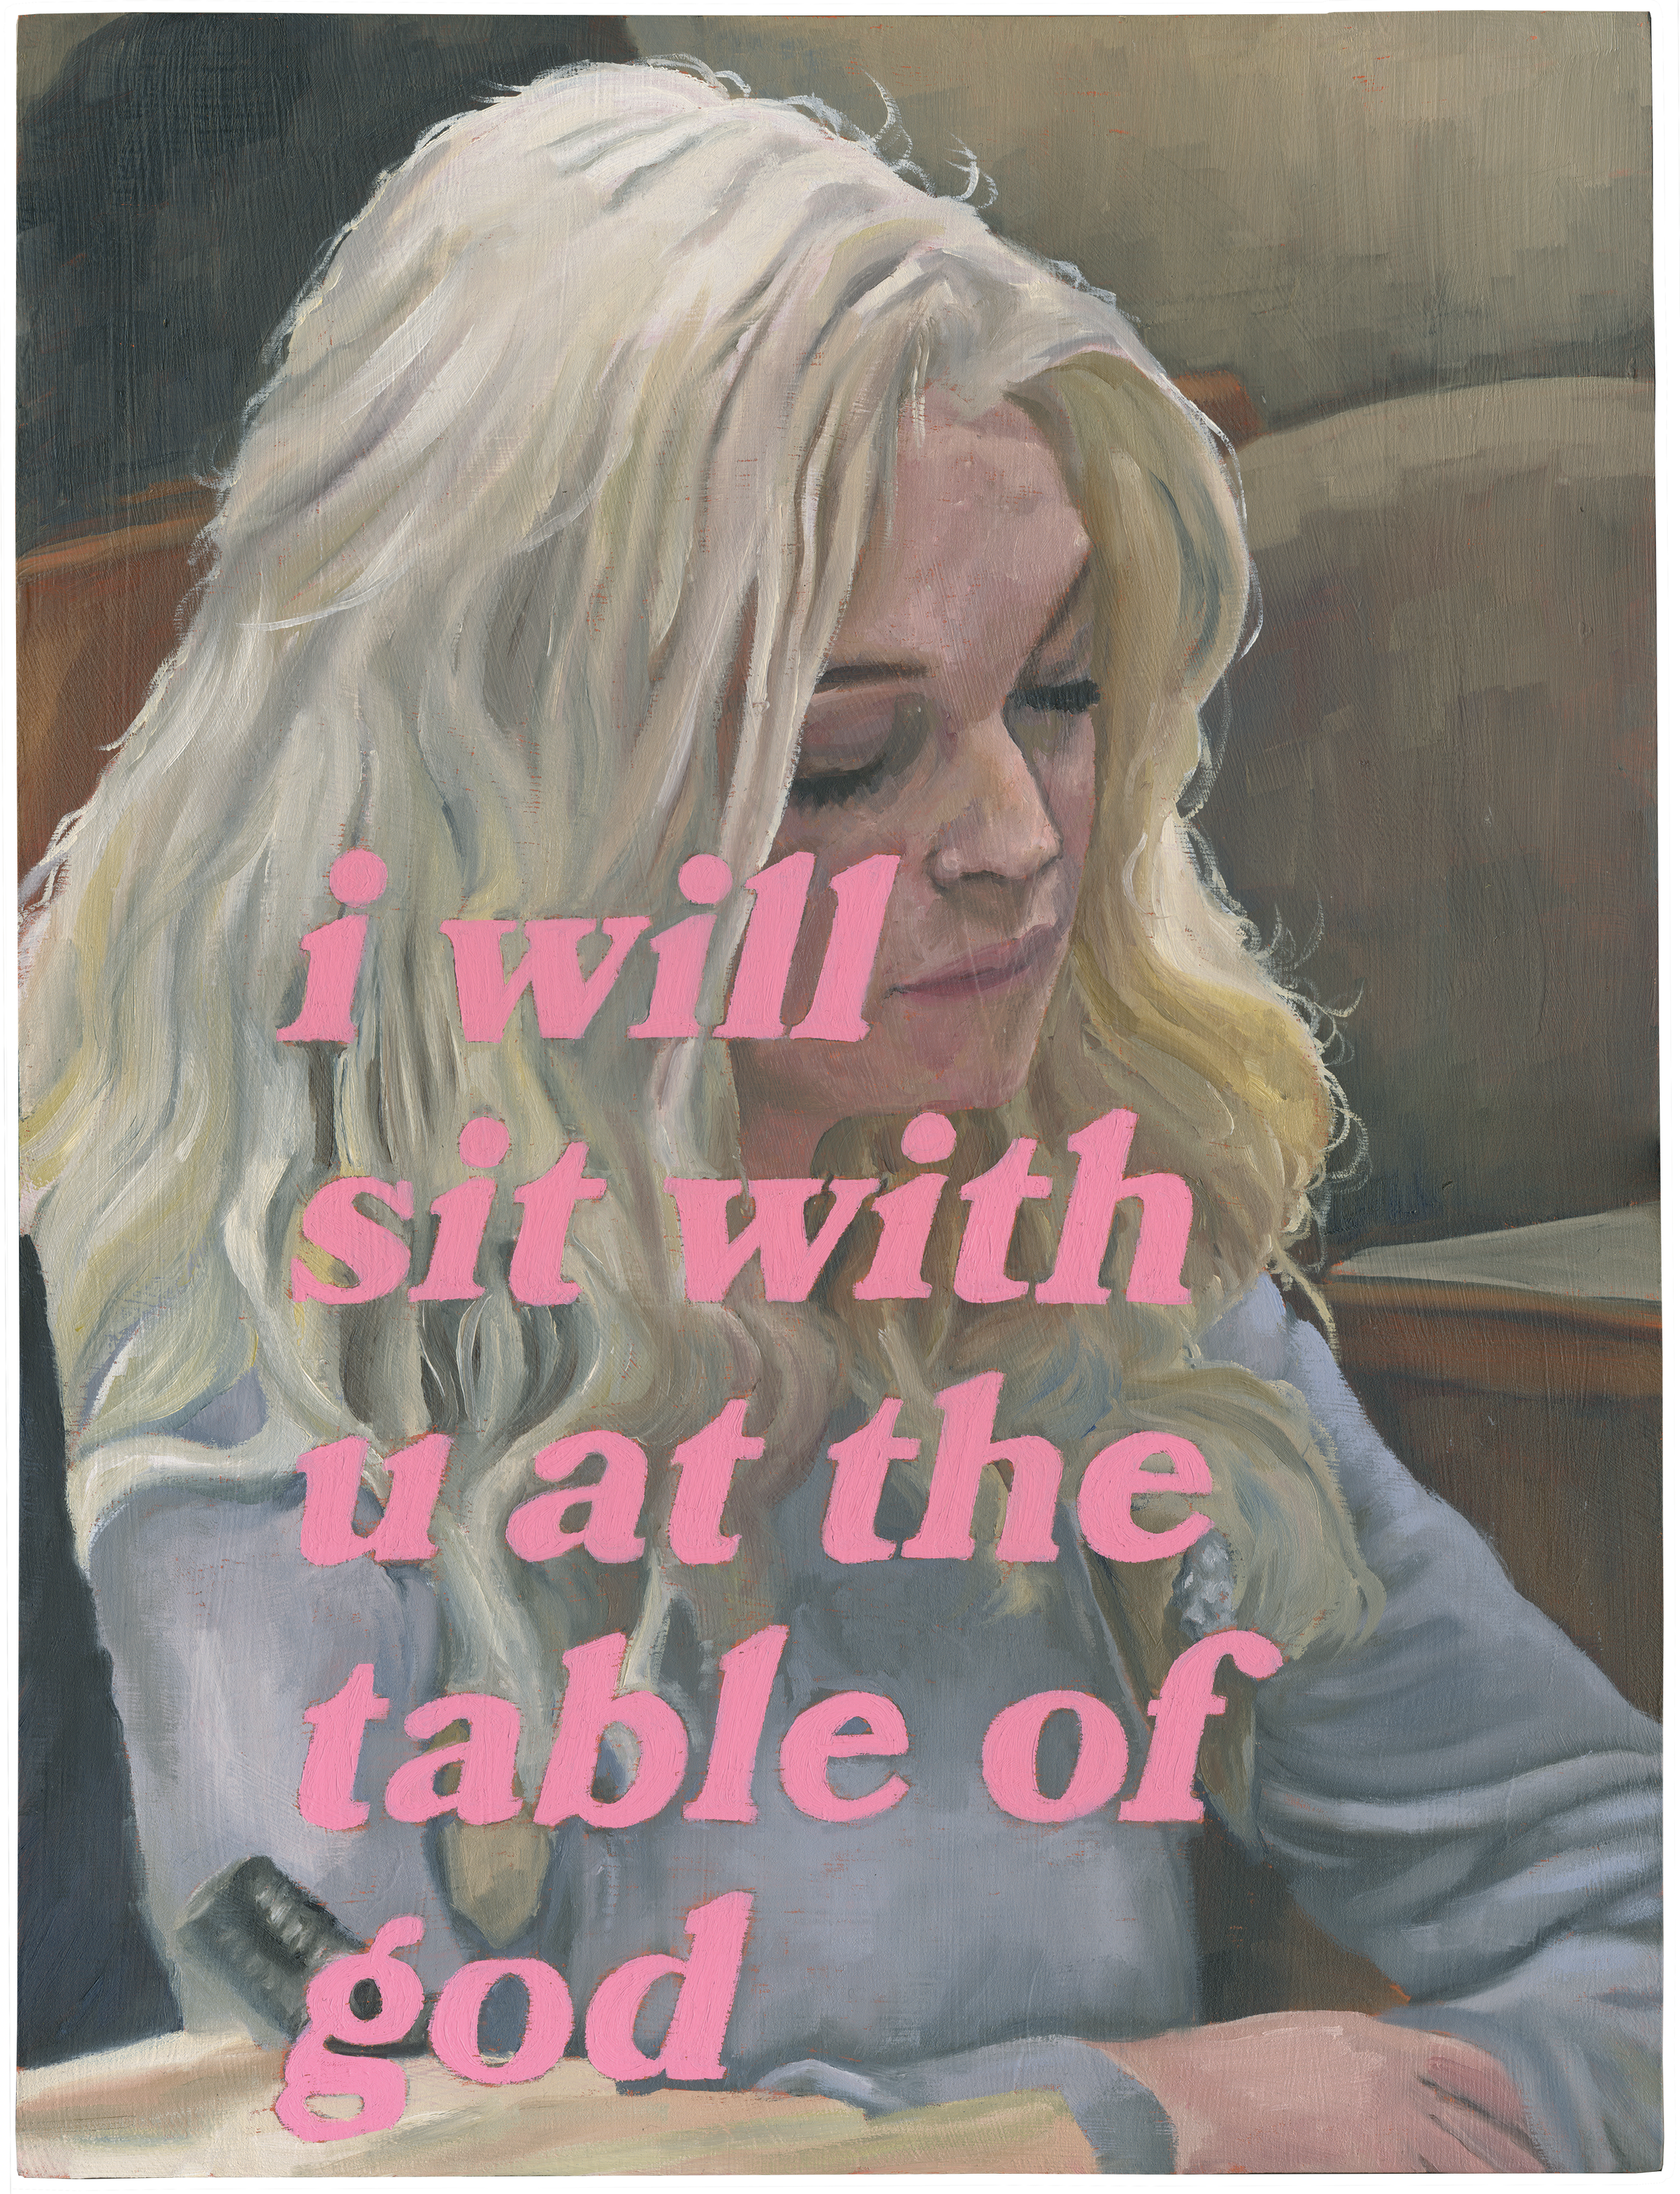 Lindsay, who is always there when i am in terror, and who will cry for me again and again (i will sit with u at the table of god)